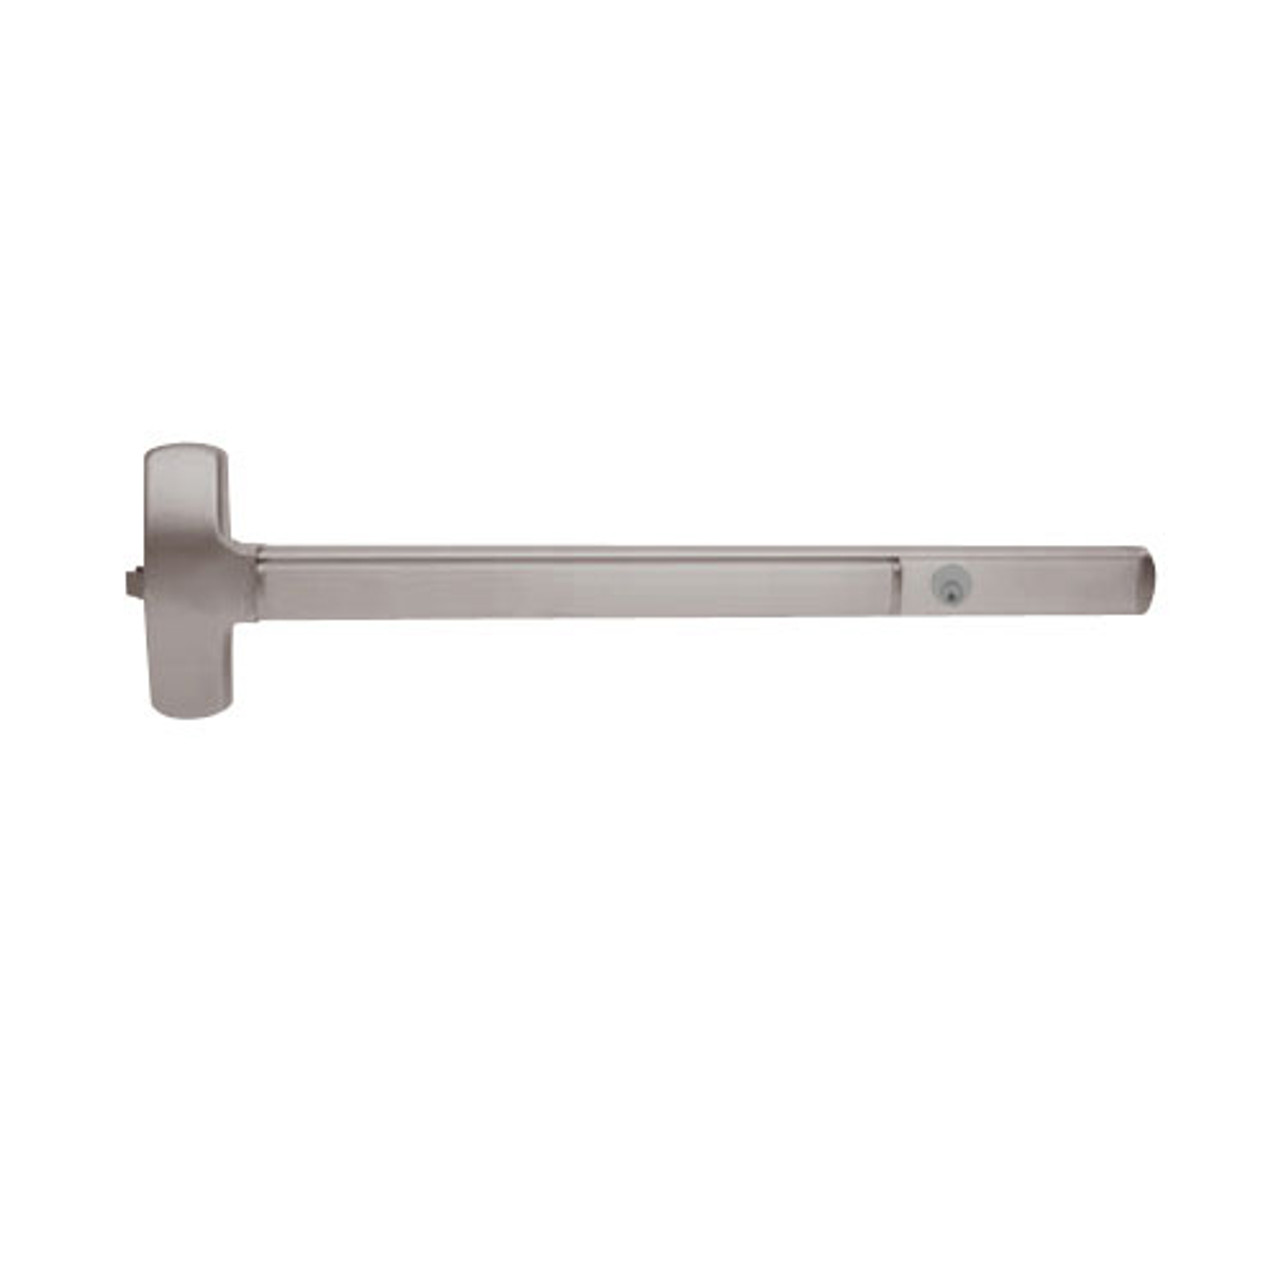 CD25-R-EO-US28-3 Falcon Exit Device in Anodized Aluminum